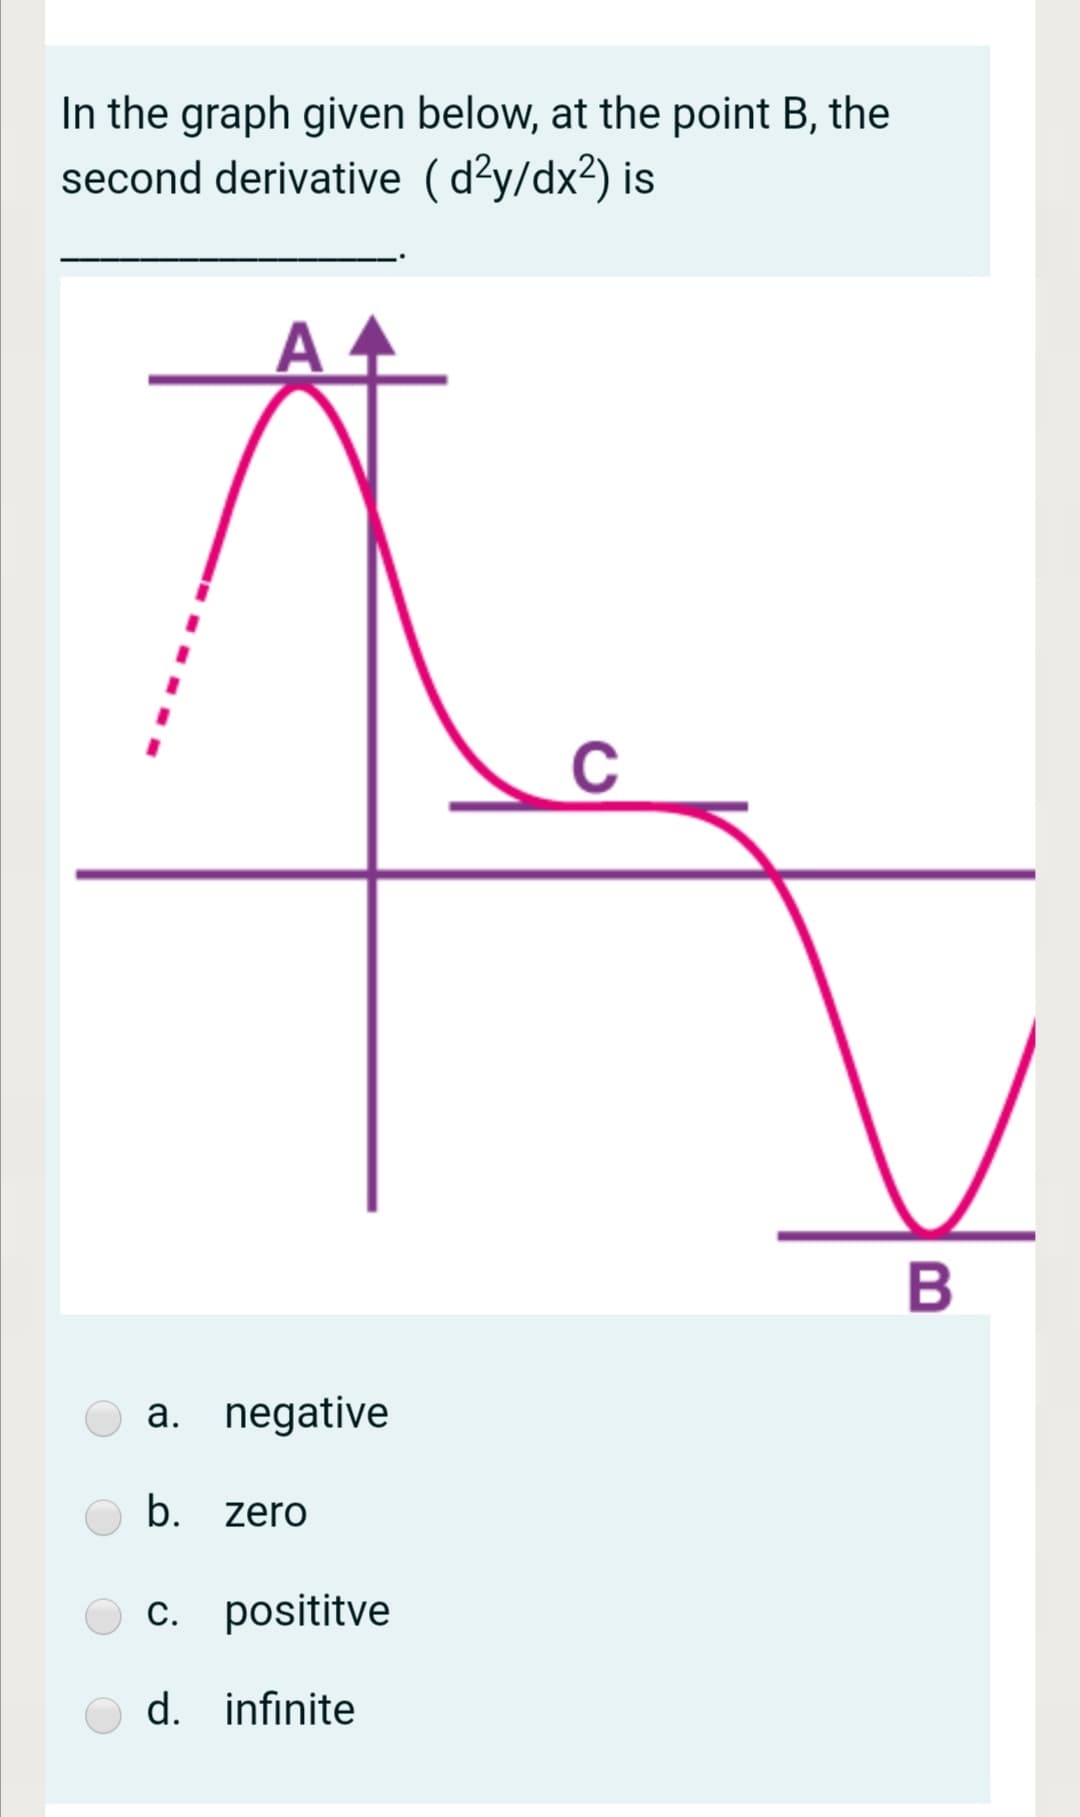 In the graph given below, at the point B, the
second derivative (d?y/dx2) is
B
a. negative
b. zero
c. posititve
d. infinite
